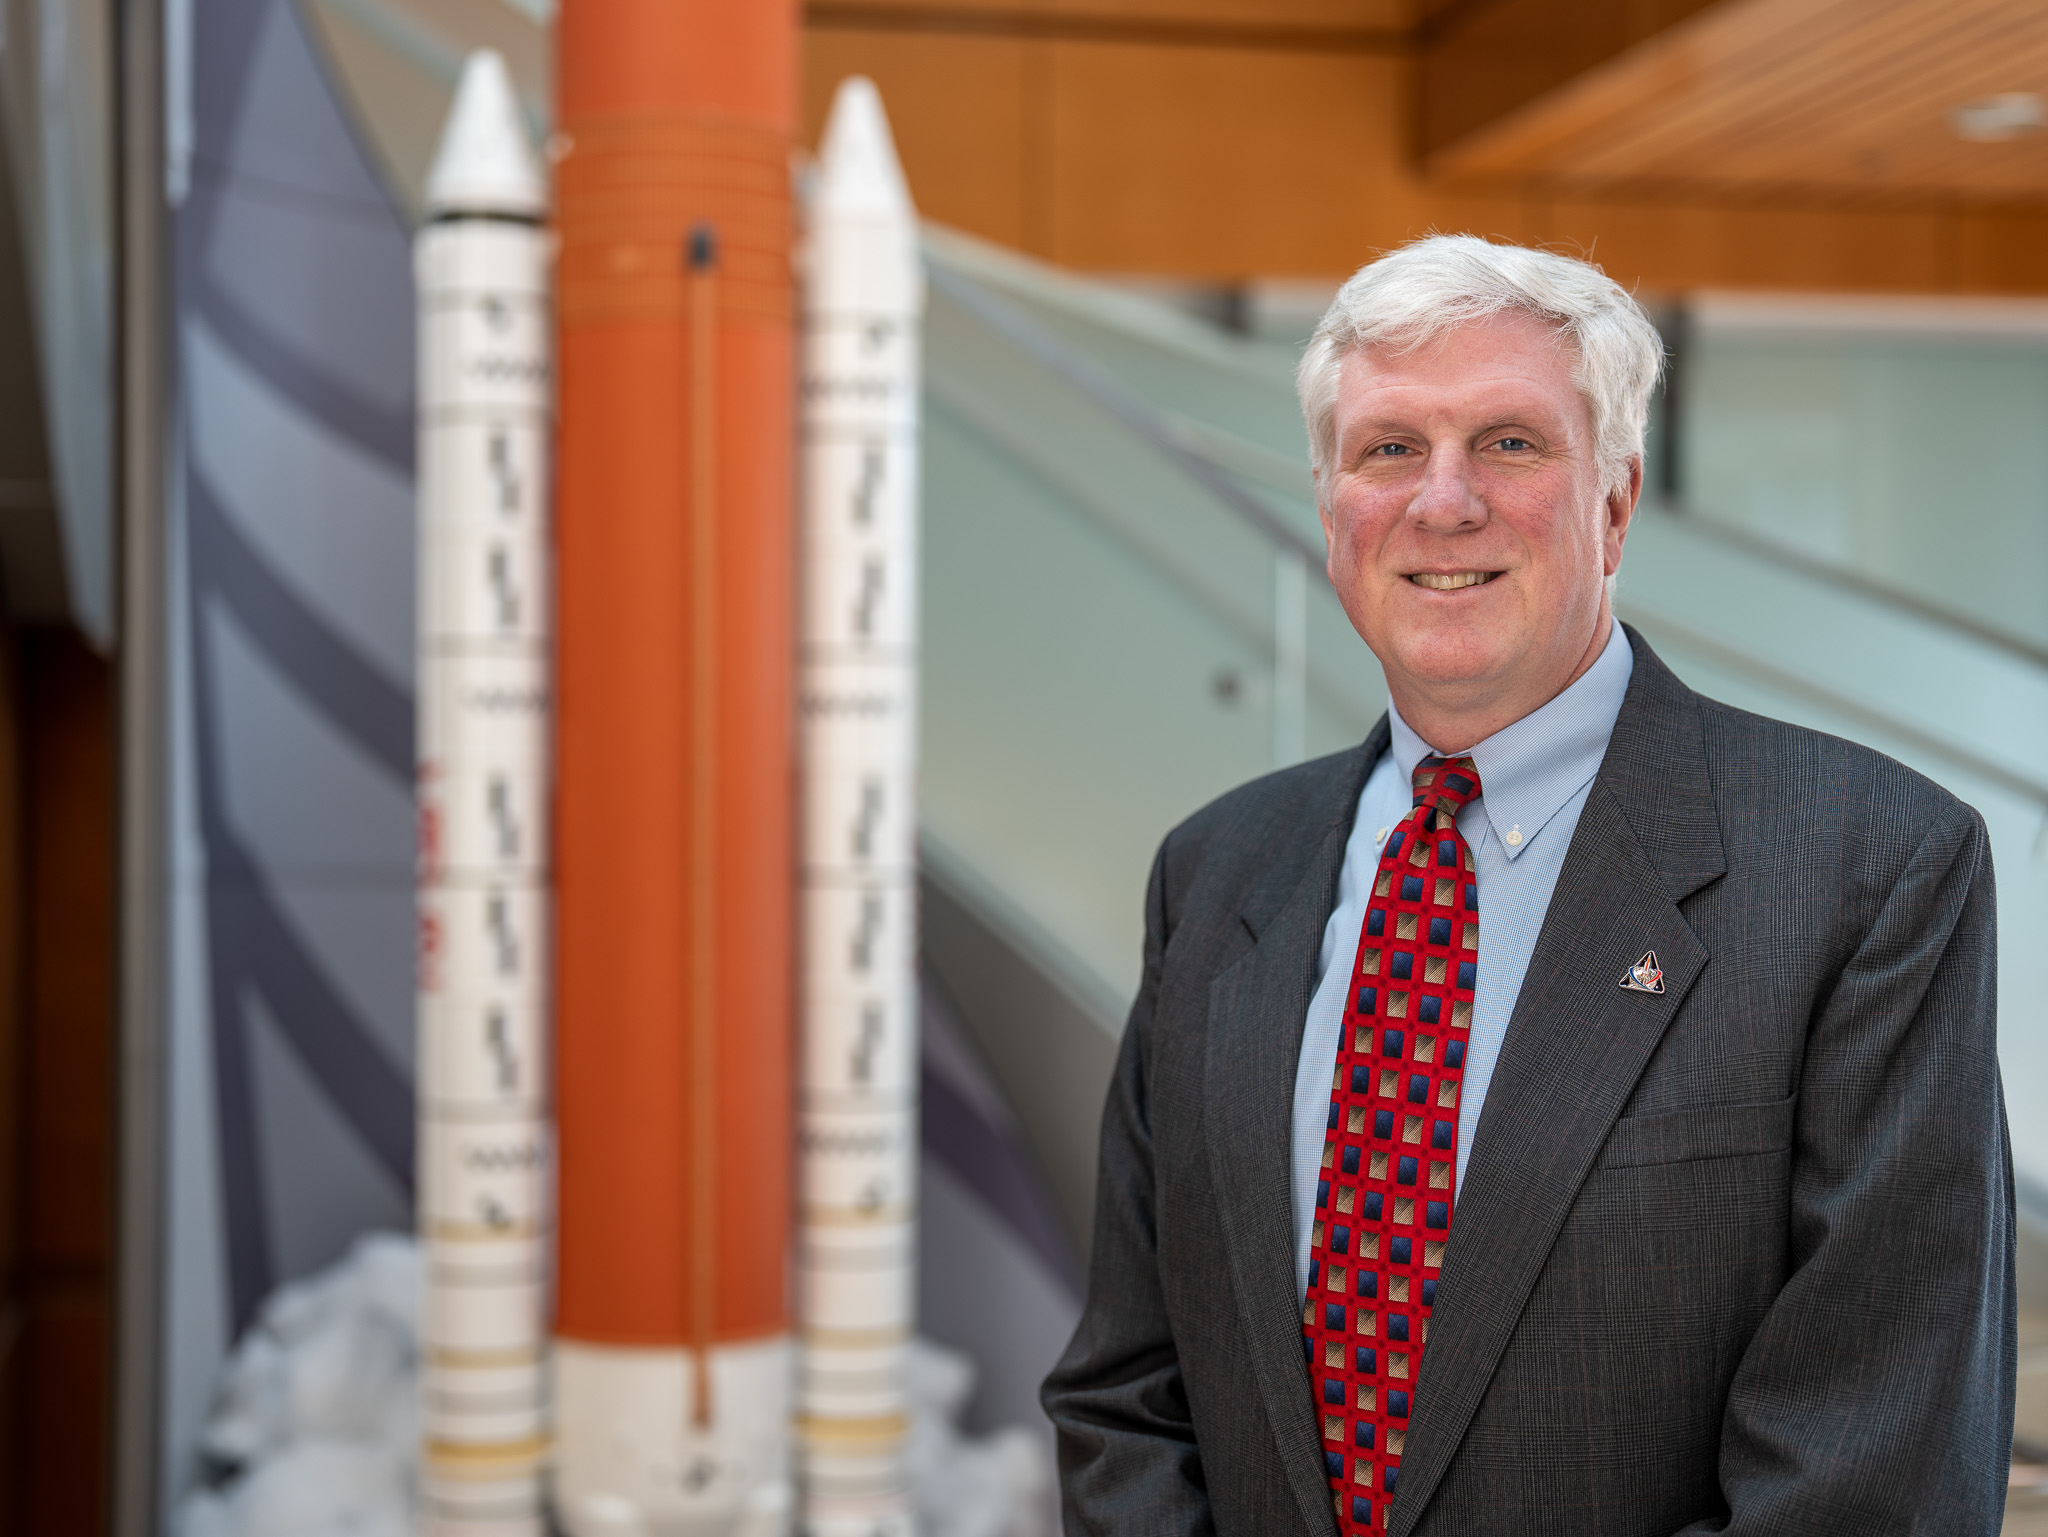 Matthew Ramsey poses for a photo in front of a model of the SLS rocket. He is wearing a grey suit, light blue shift and a red and black patterned tie.